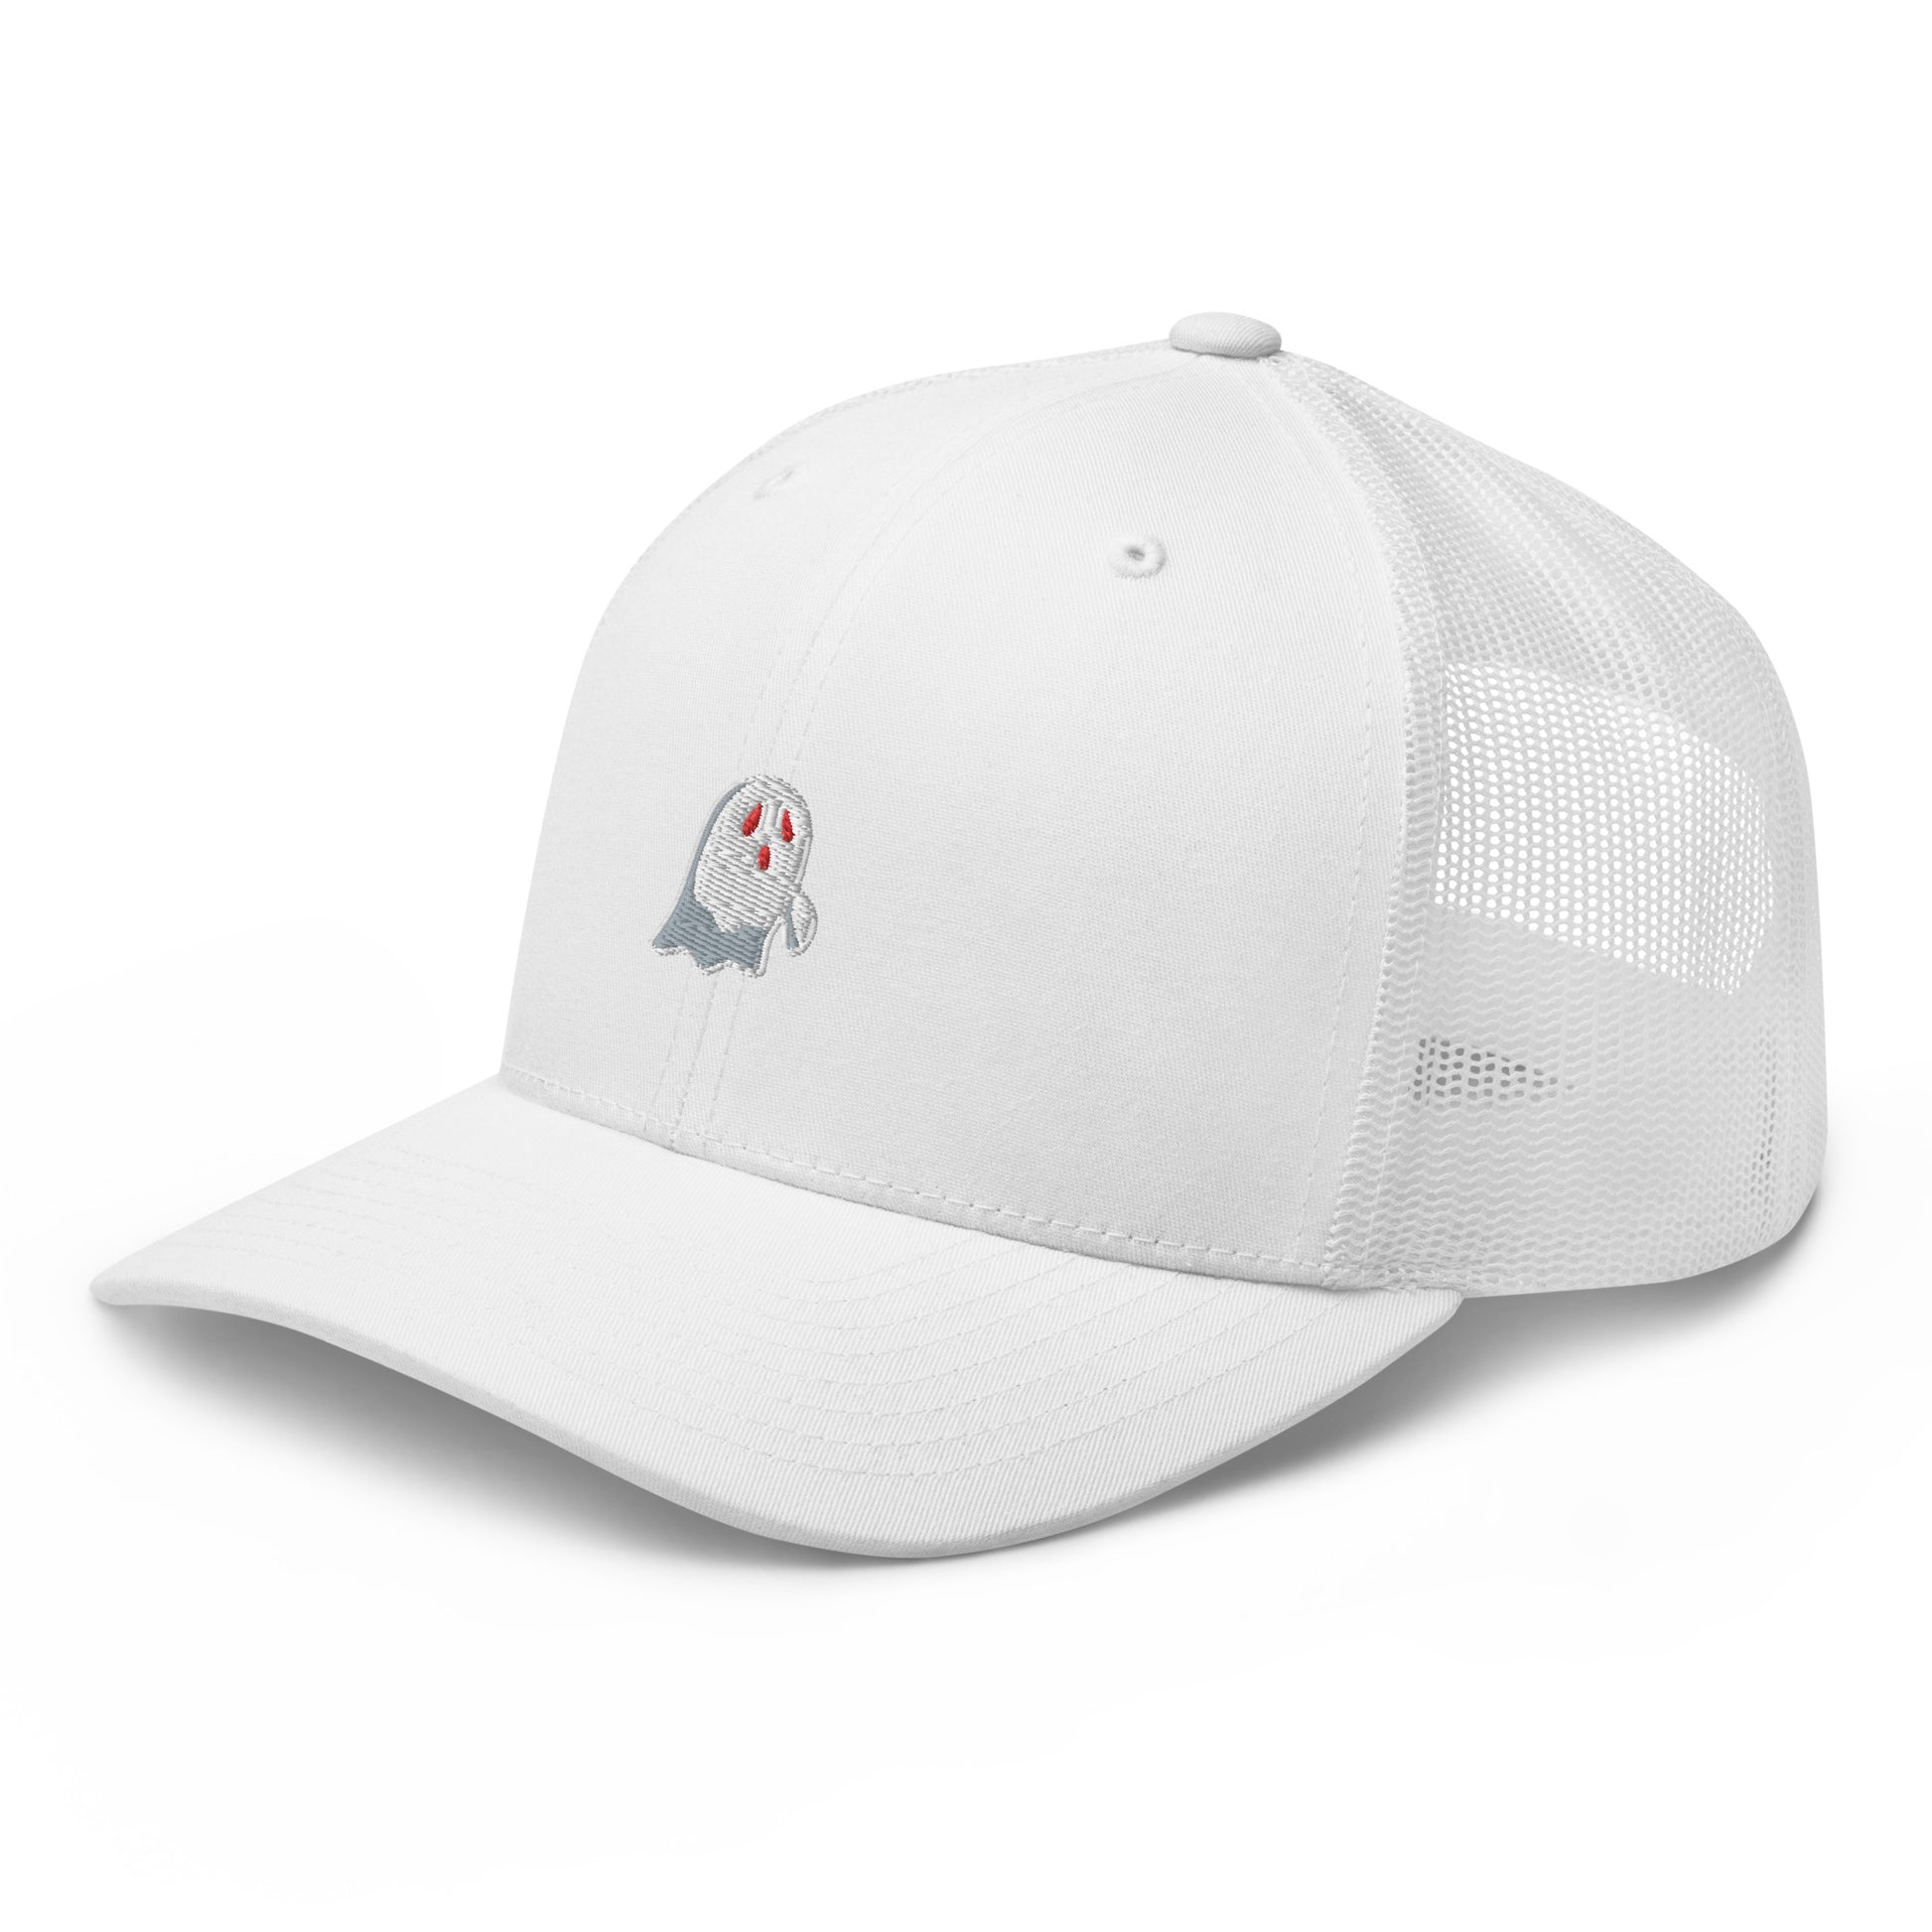  cap-from-the-front-with-ghost-symbol